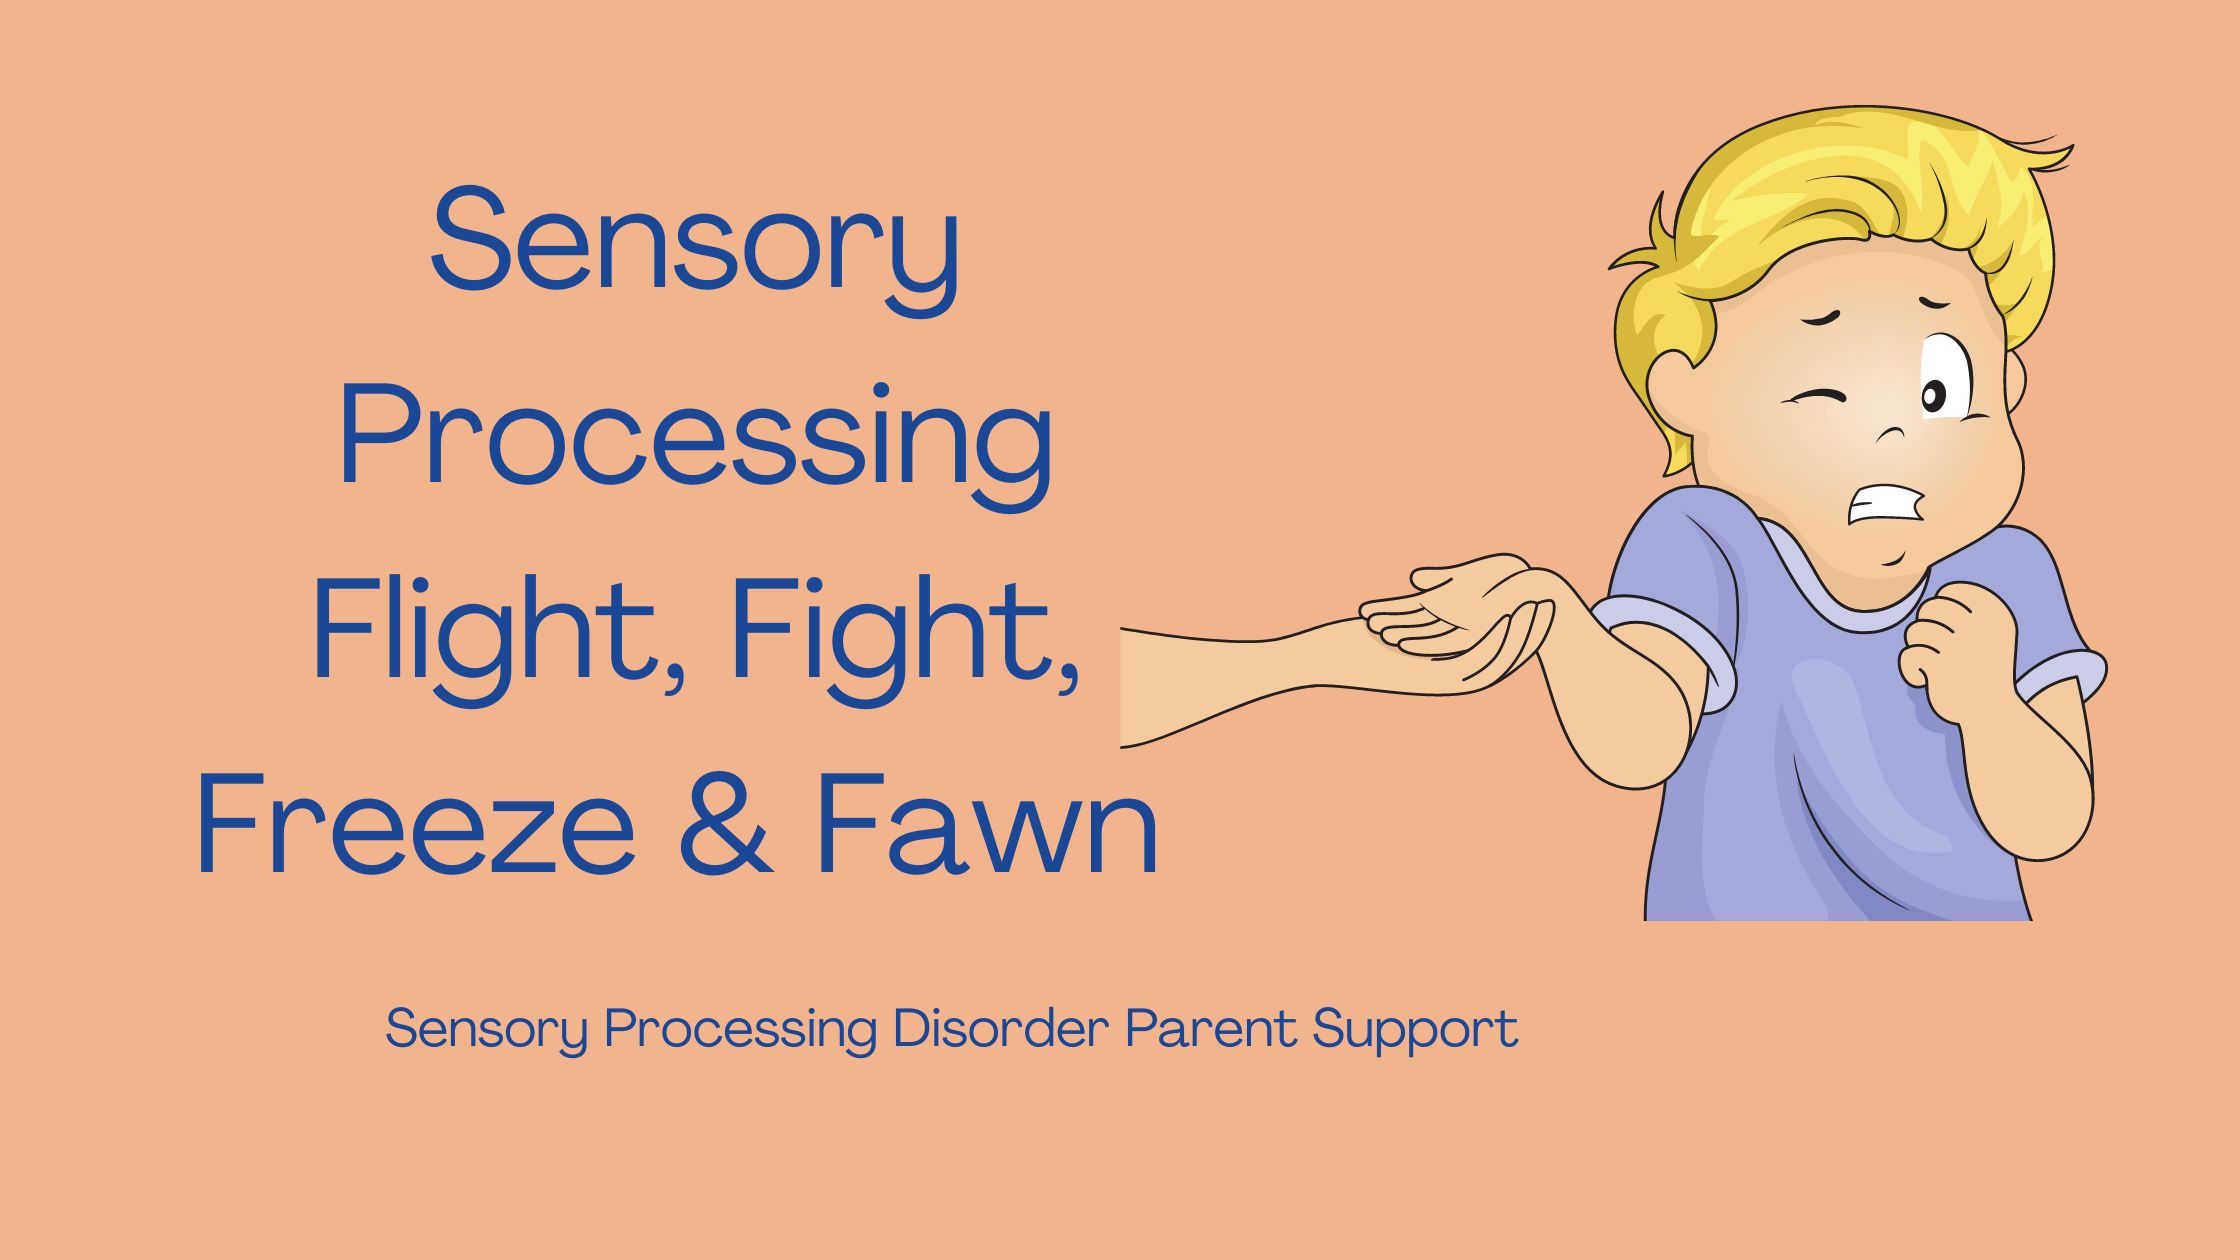 child who has anxiety and sensory processing disorder scared in fight or flight Sensory Processing Flight, Fight, Freeze & Fawn